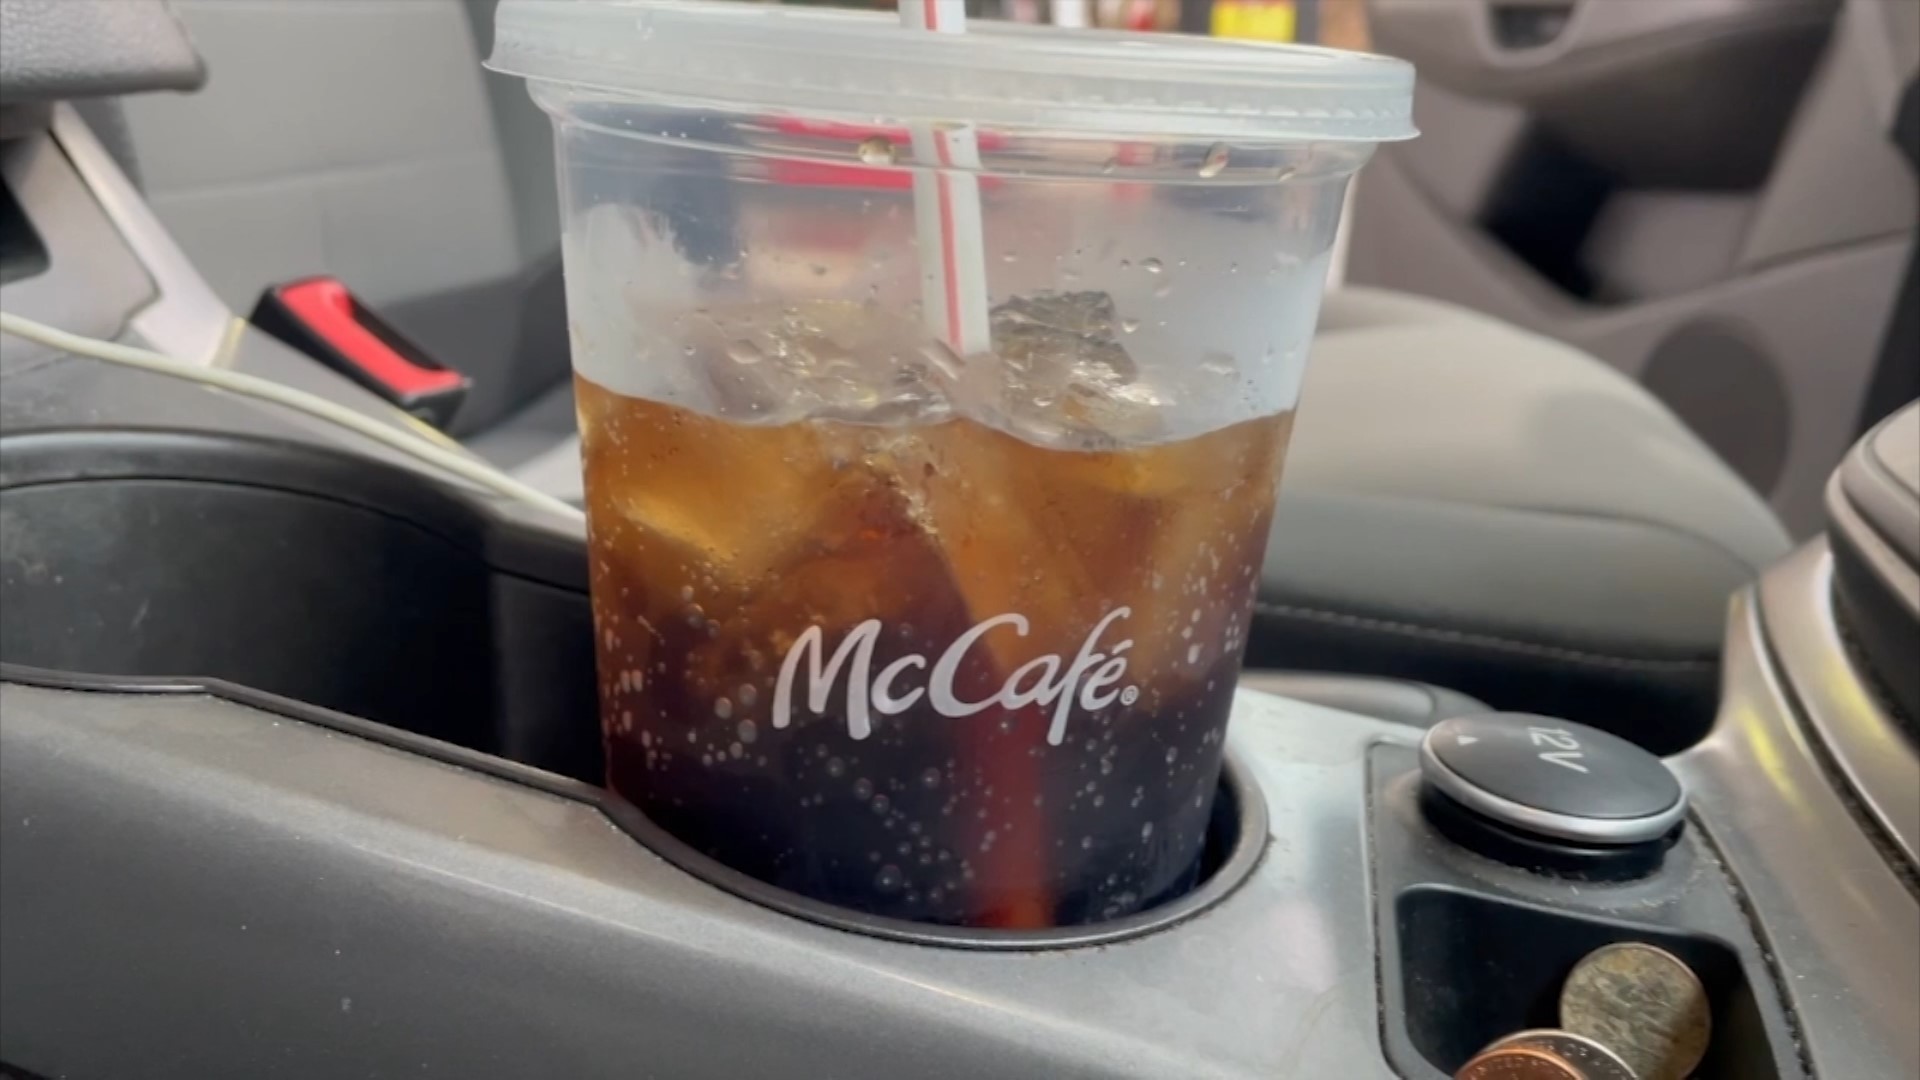 Inflation is hitting fast food restaurants in the drink menu now, with dollar drinks slowly becoming a thing of the past.